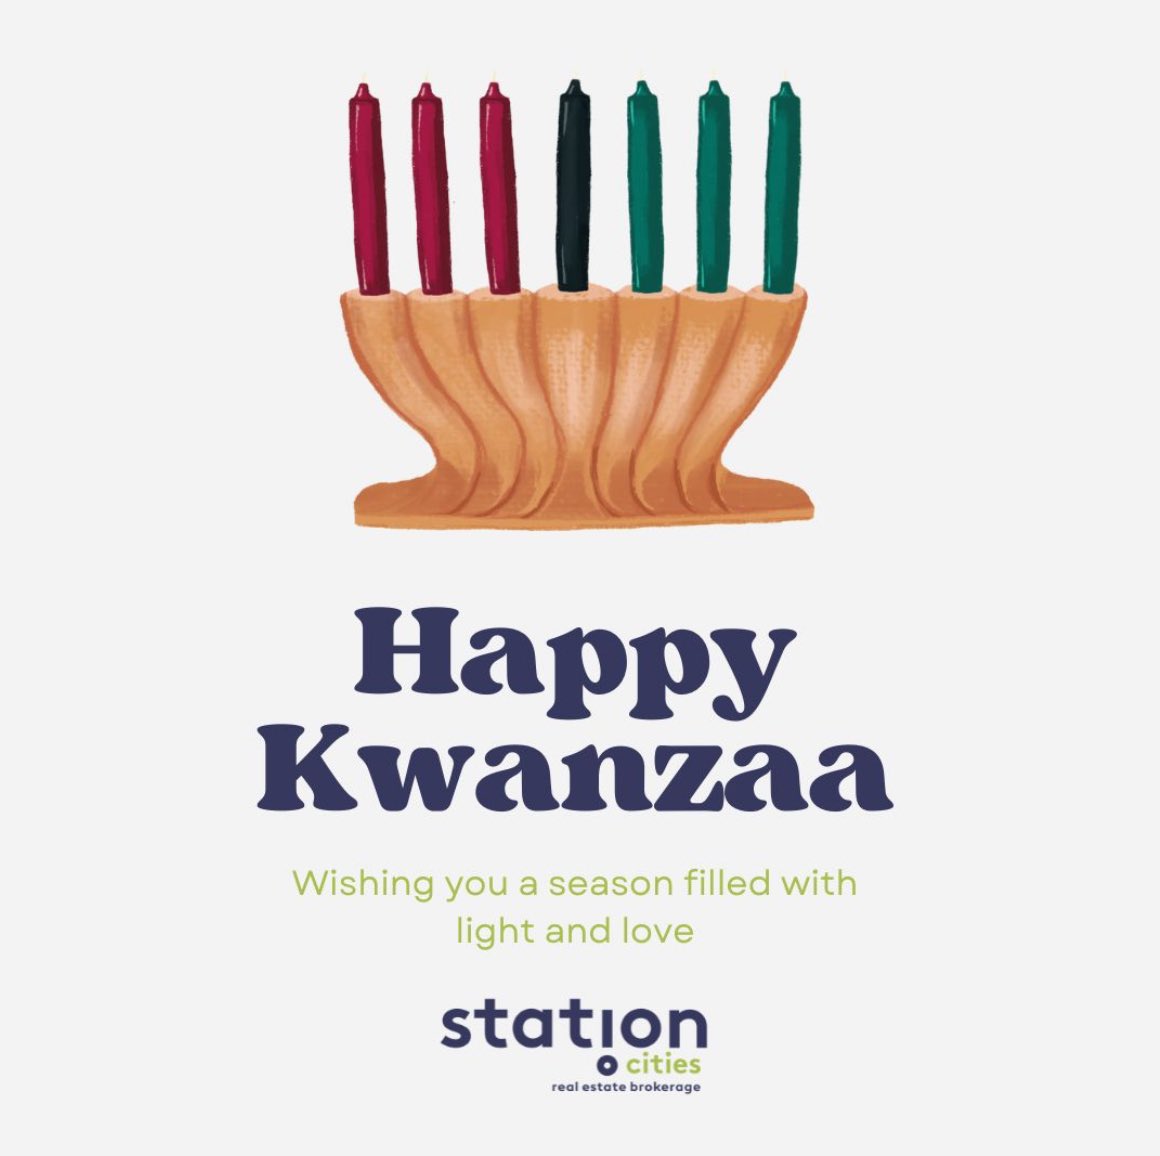 On the first night of Kwanzaa wishing you peace, light, and prosperity.

#gratitude #kwanzaa #relocation  #madeleinepearlgroup #stationcities 
#stationcitieschicago #luxuryrealestate  #chicagorealtor #chicagolandrealtor 
#chicagorealestate #topproducer #chicagolandrealestate